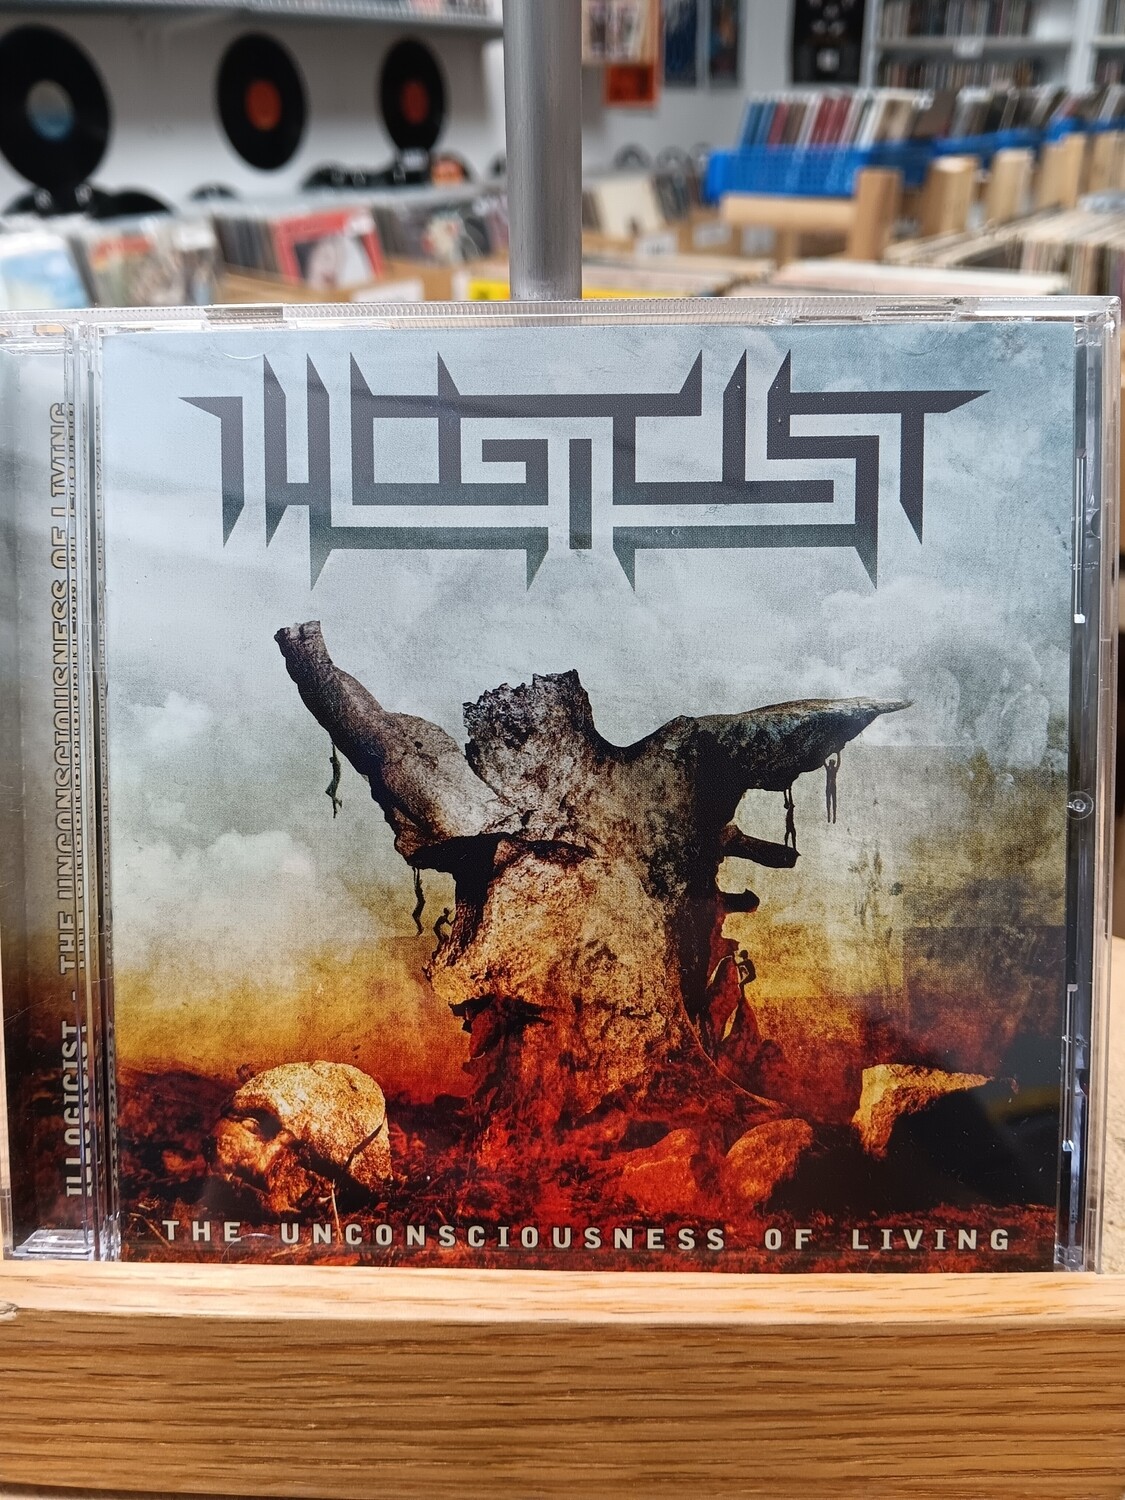 ILLOGICIST - The unconsciousness of living (CD)